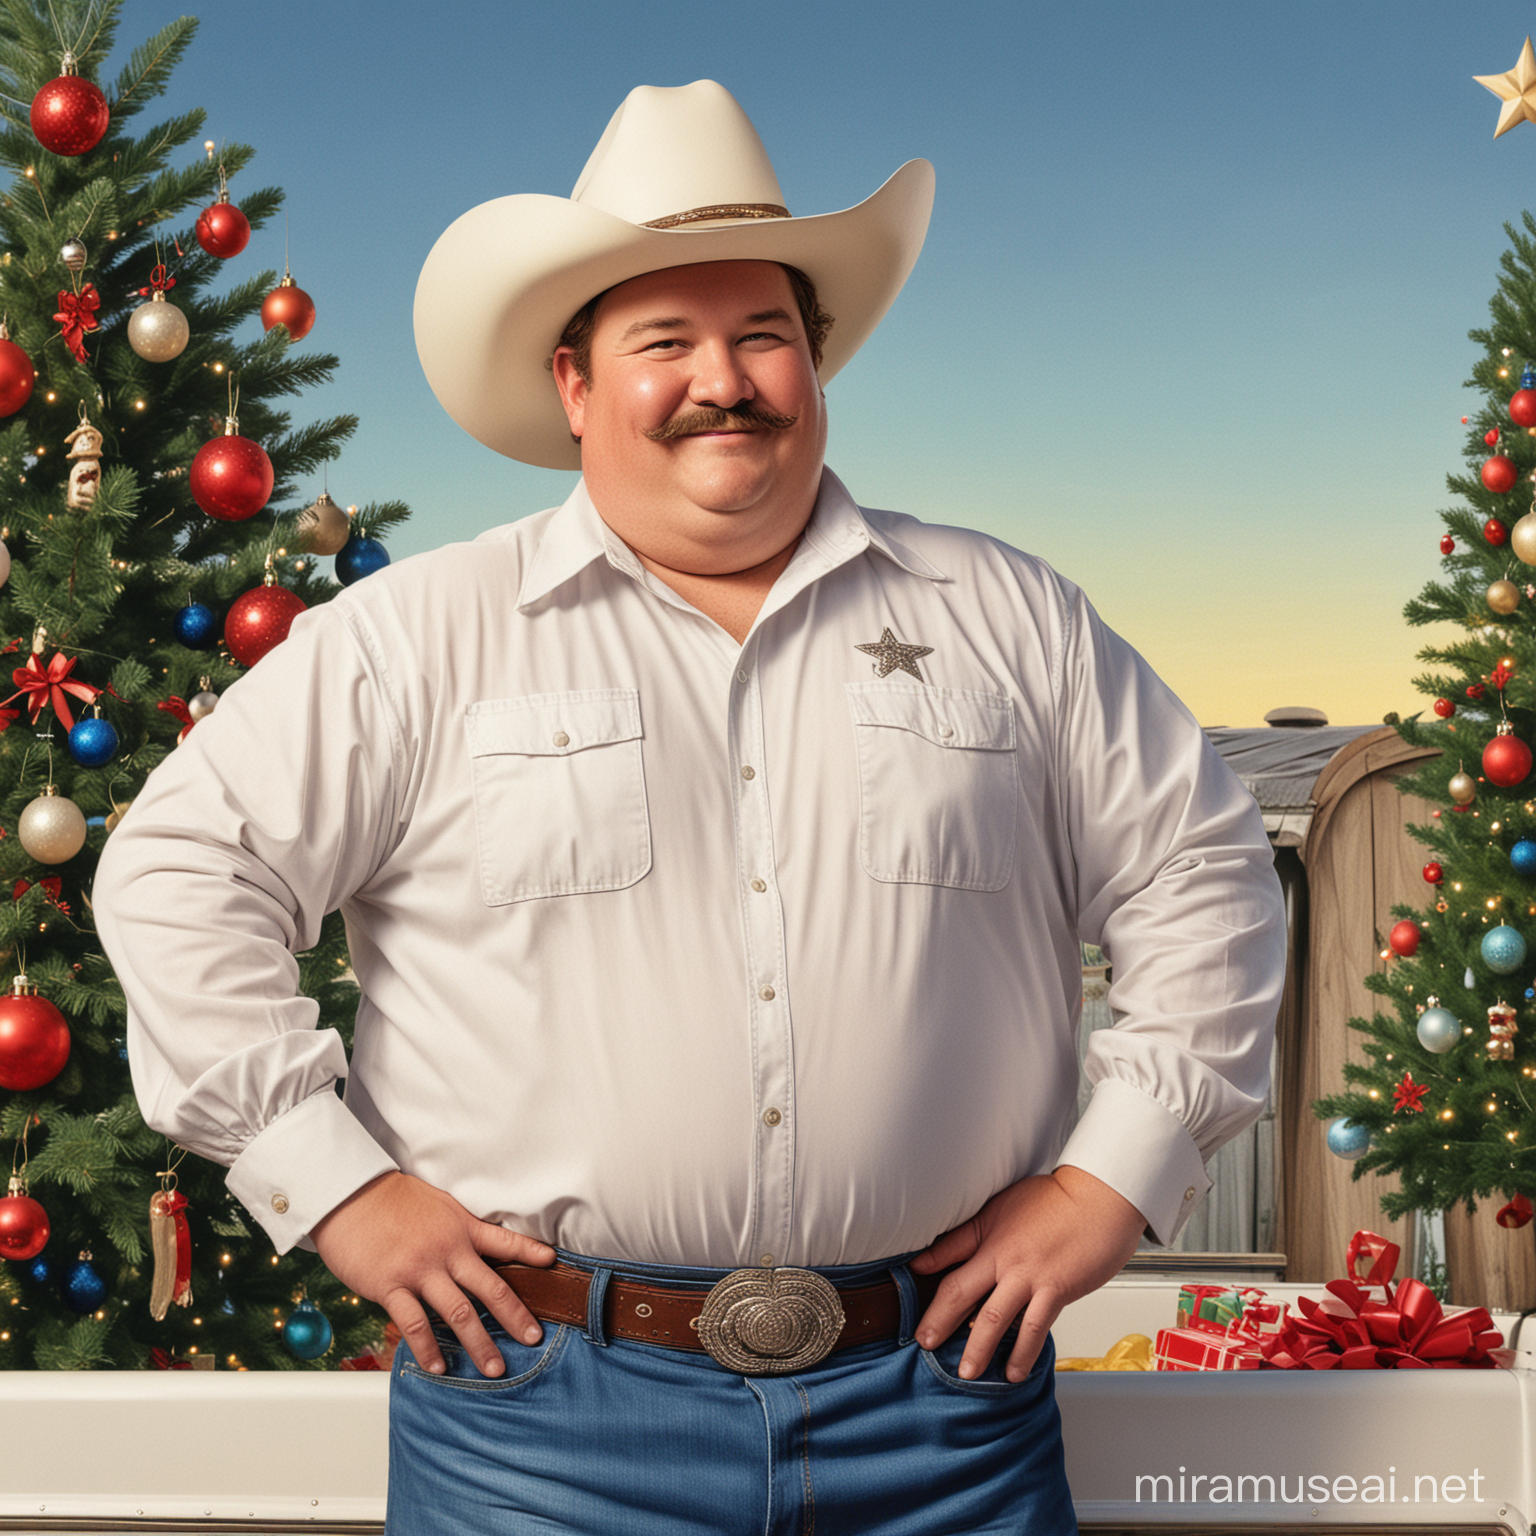 A poster of a obese man from Texas, mustache, wearing a white cowboy hat, crossing his arms, standing behind a Christmas tree, smiling, Standing behind a pickup truck